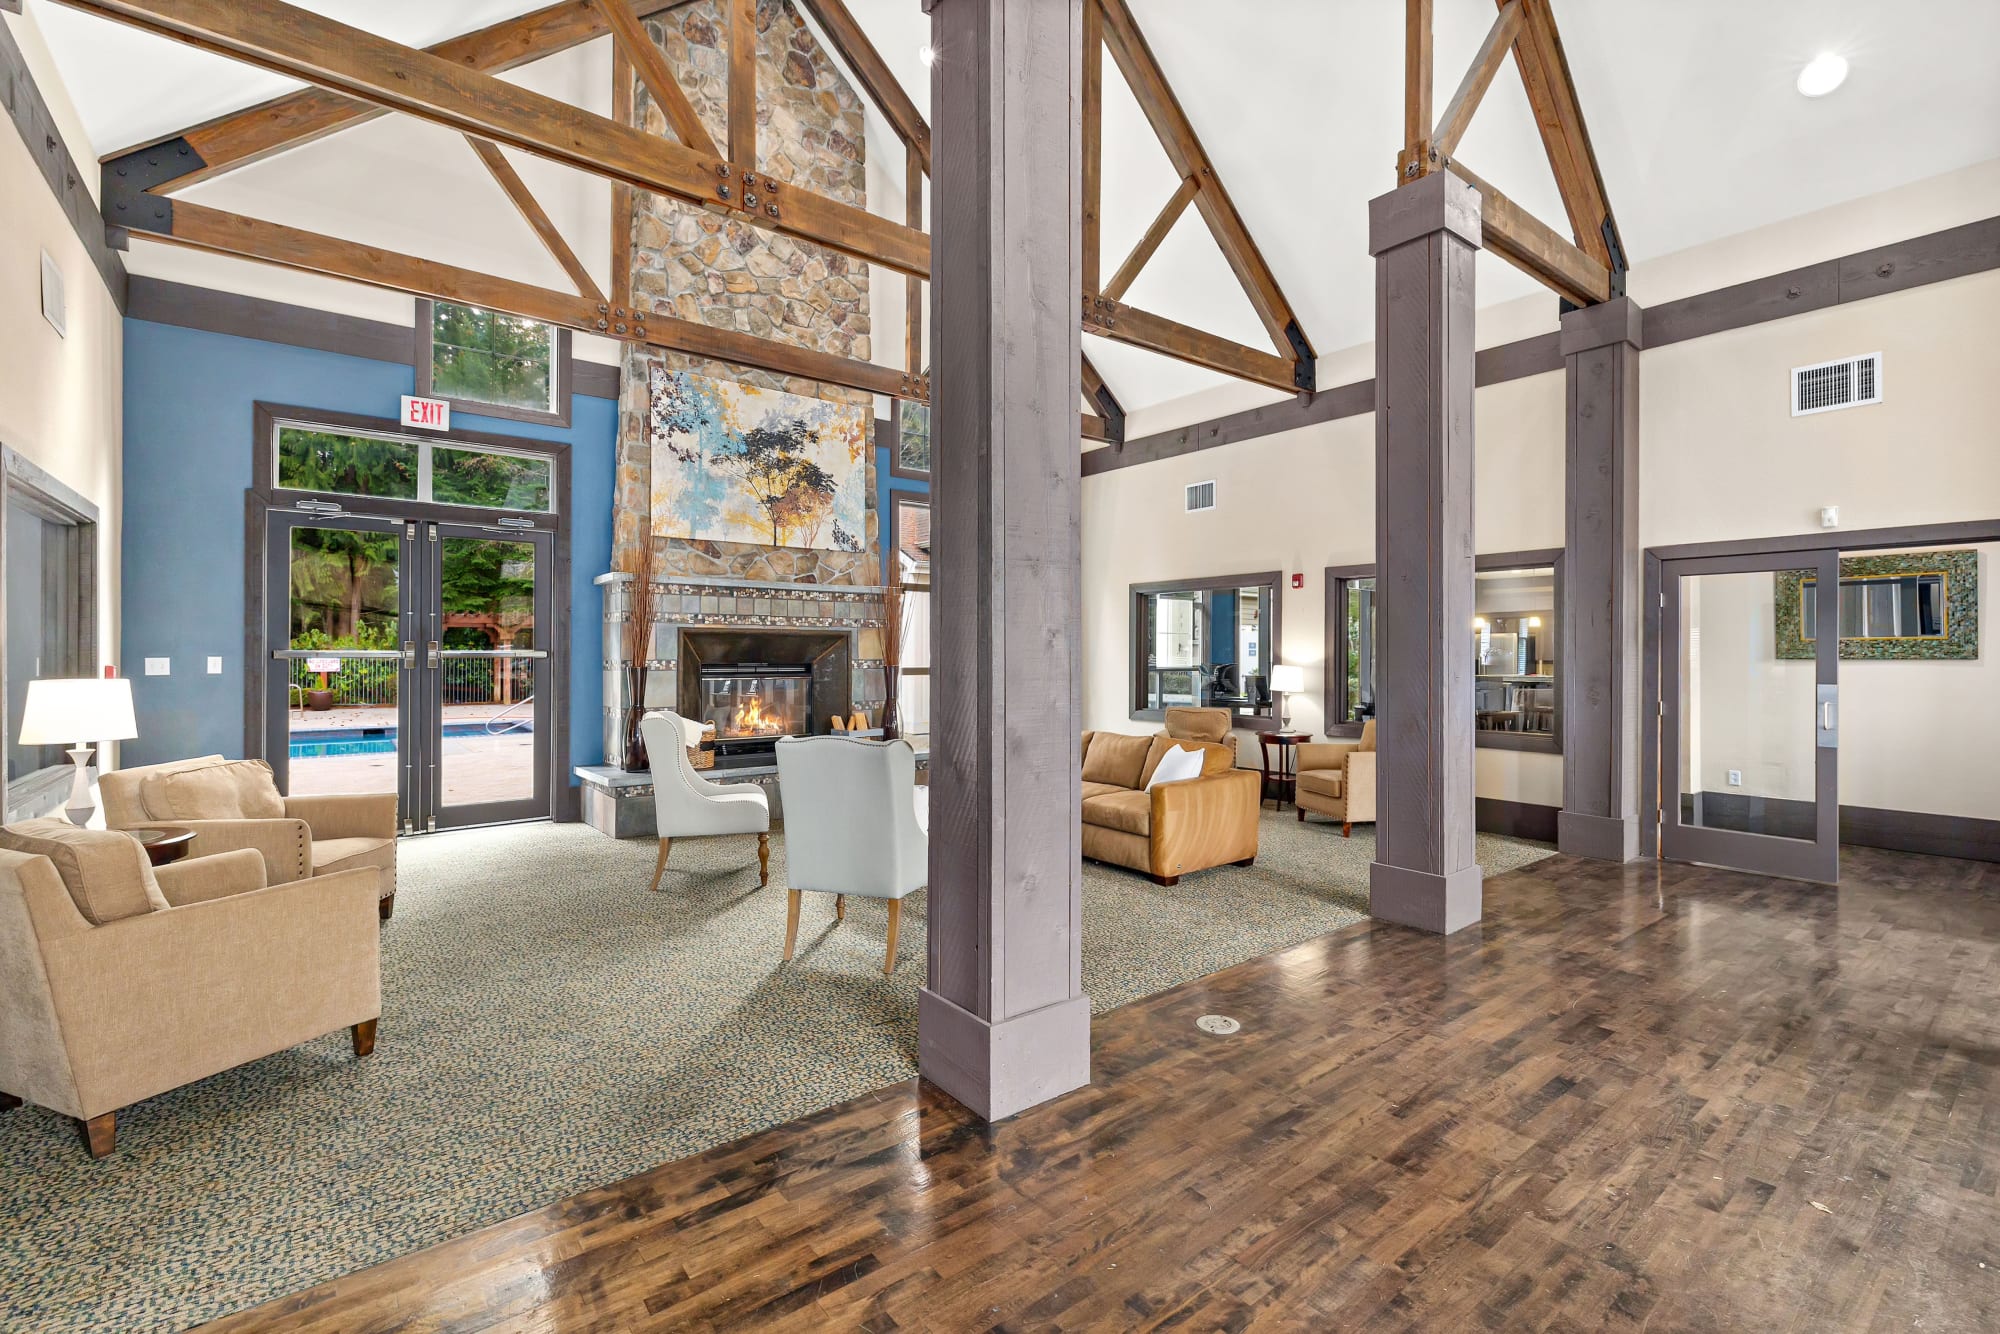 The interior of the clubhouse at Wildreed Apartments in Everett, Washington